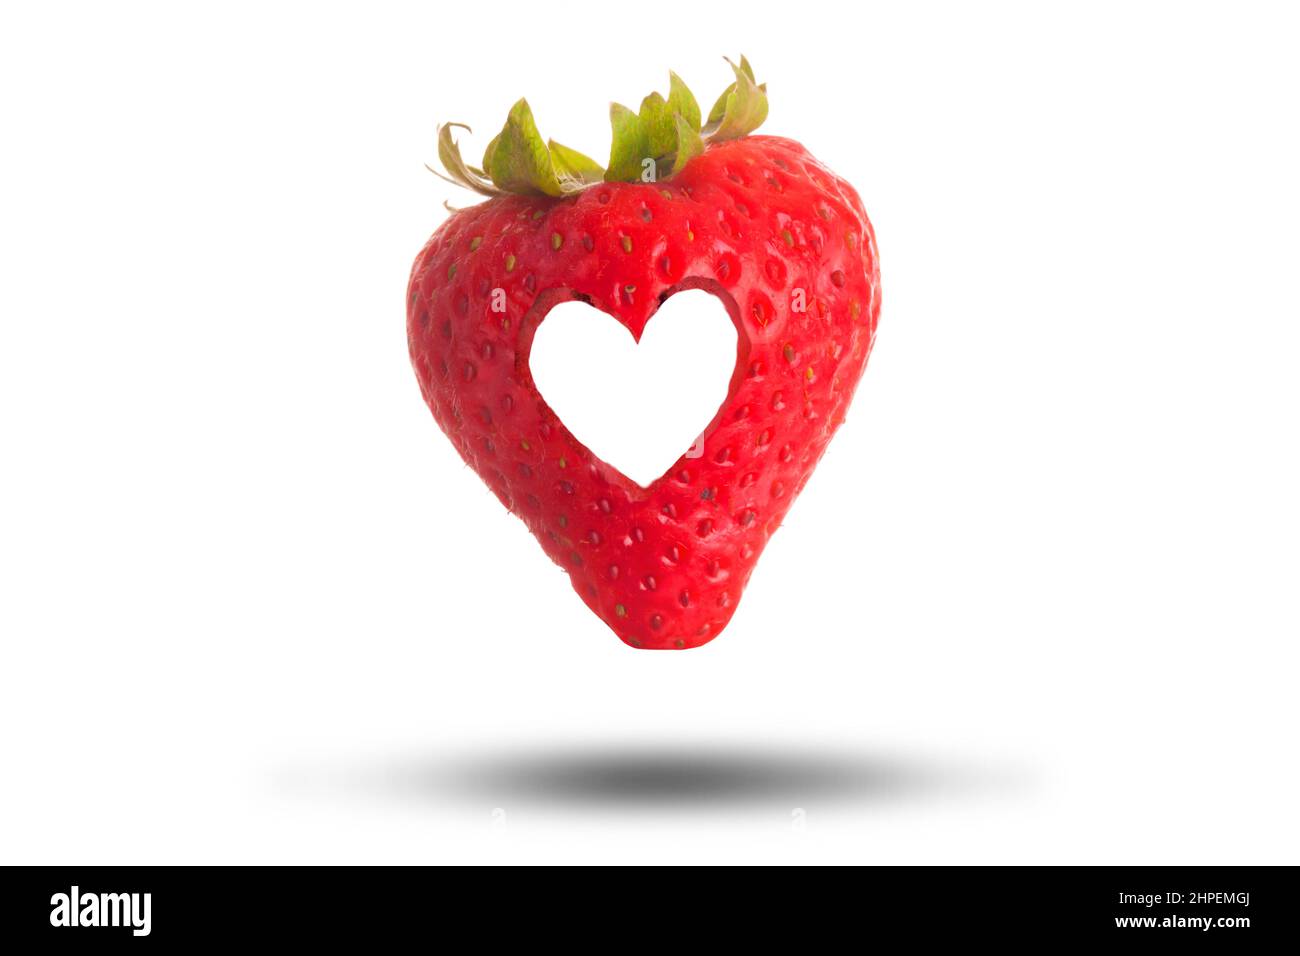 Love heart cut through a red strawberry isolated on a white background. Love fresh fruit concept Stock Photo